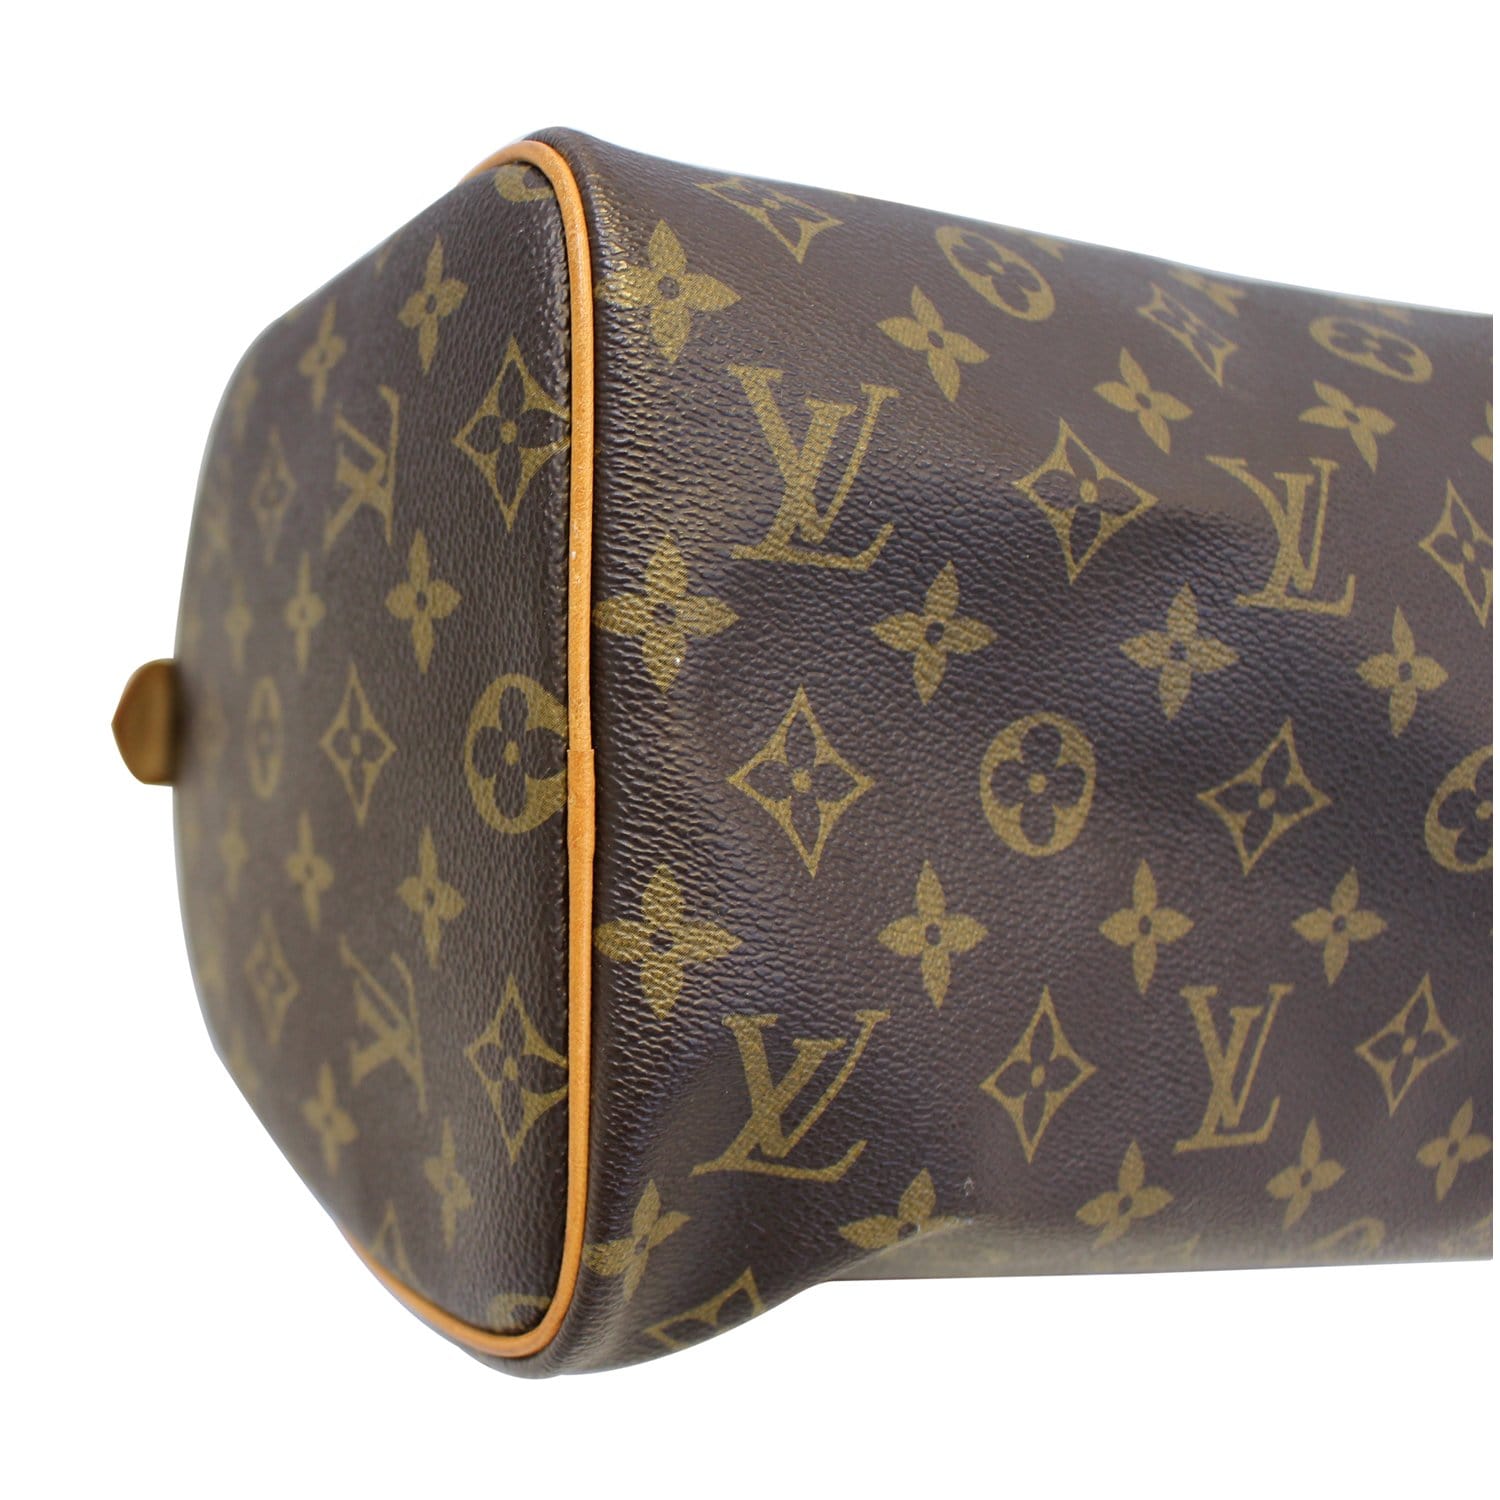 Louis Vuitton Speedy Bags Tagged Tradesy-Unpublished - Couture USA